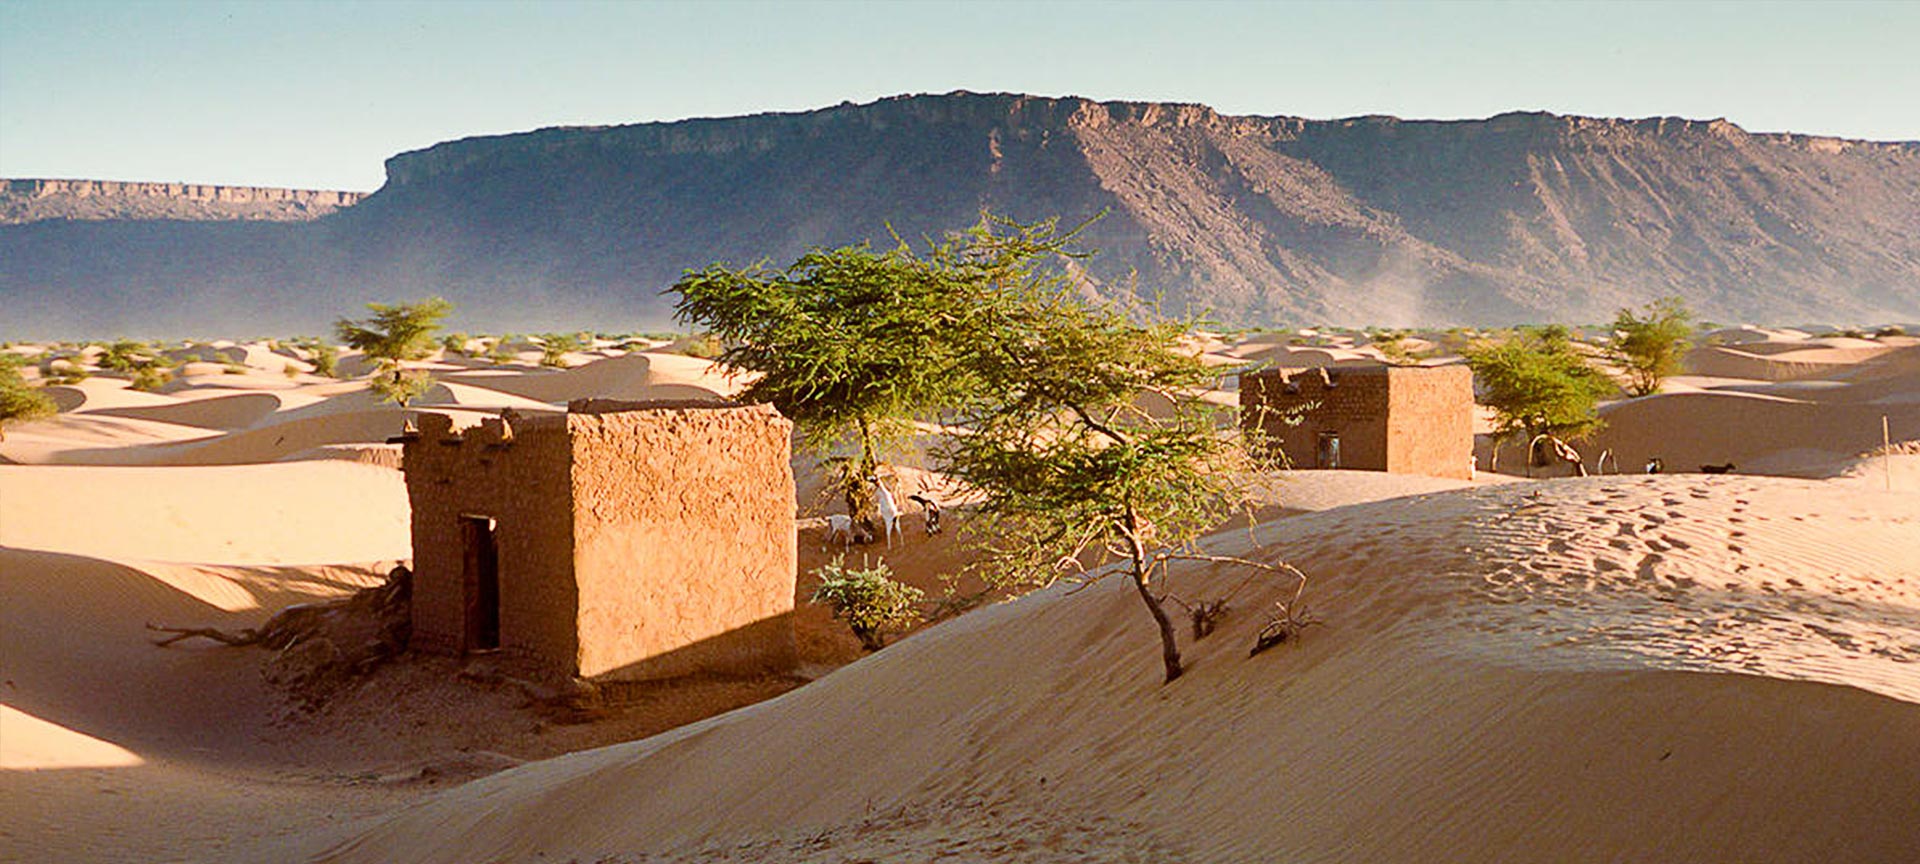 A desert area with two building structures standing 